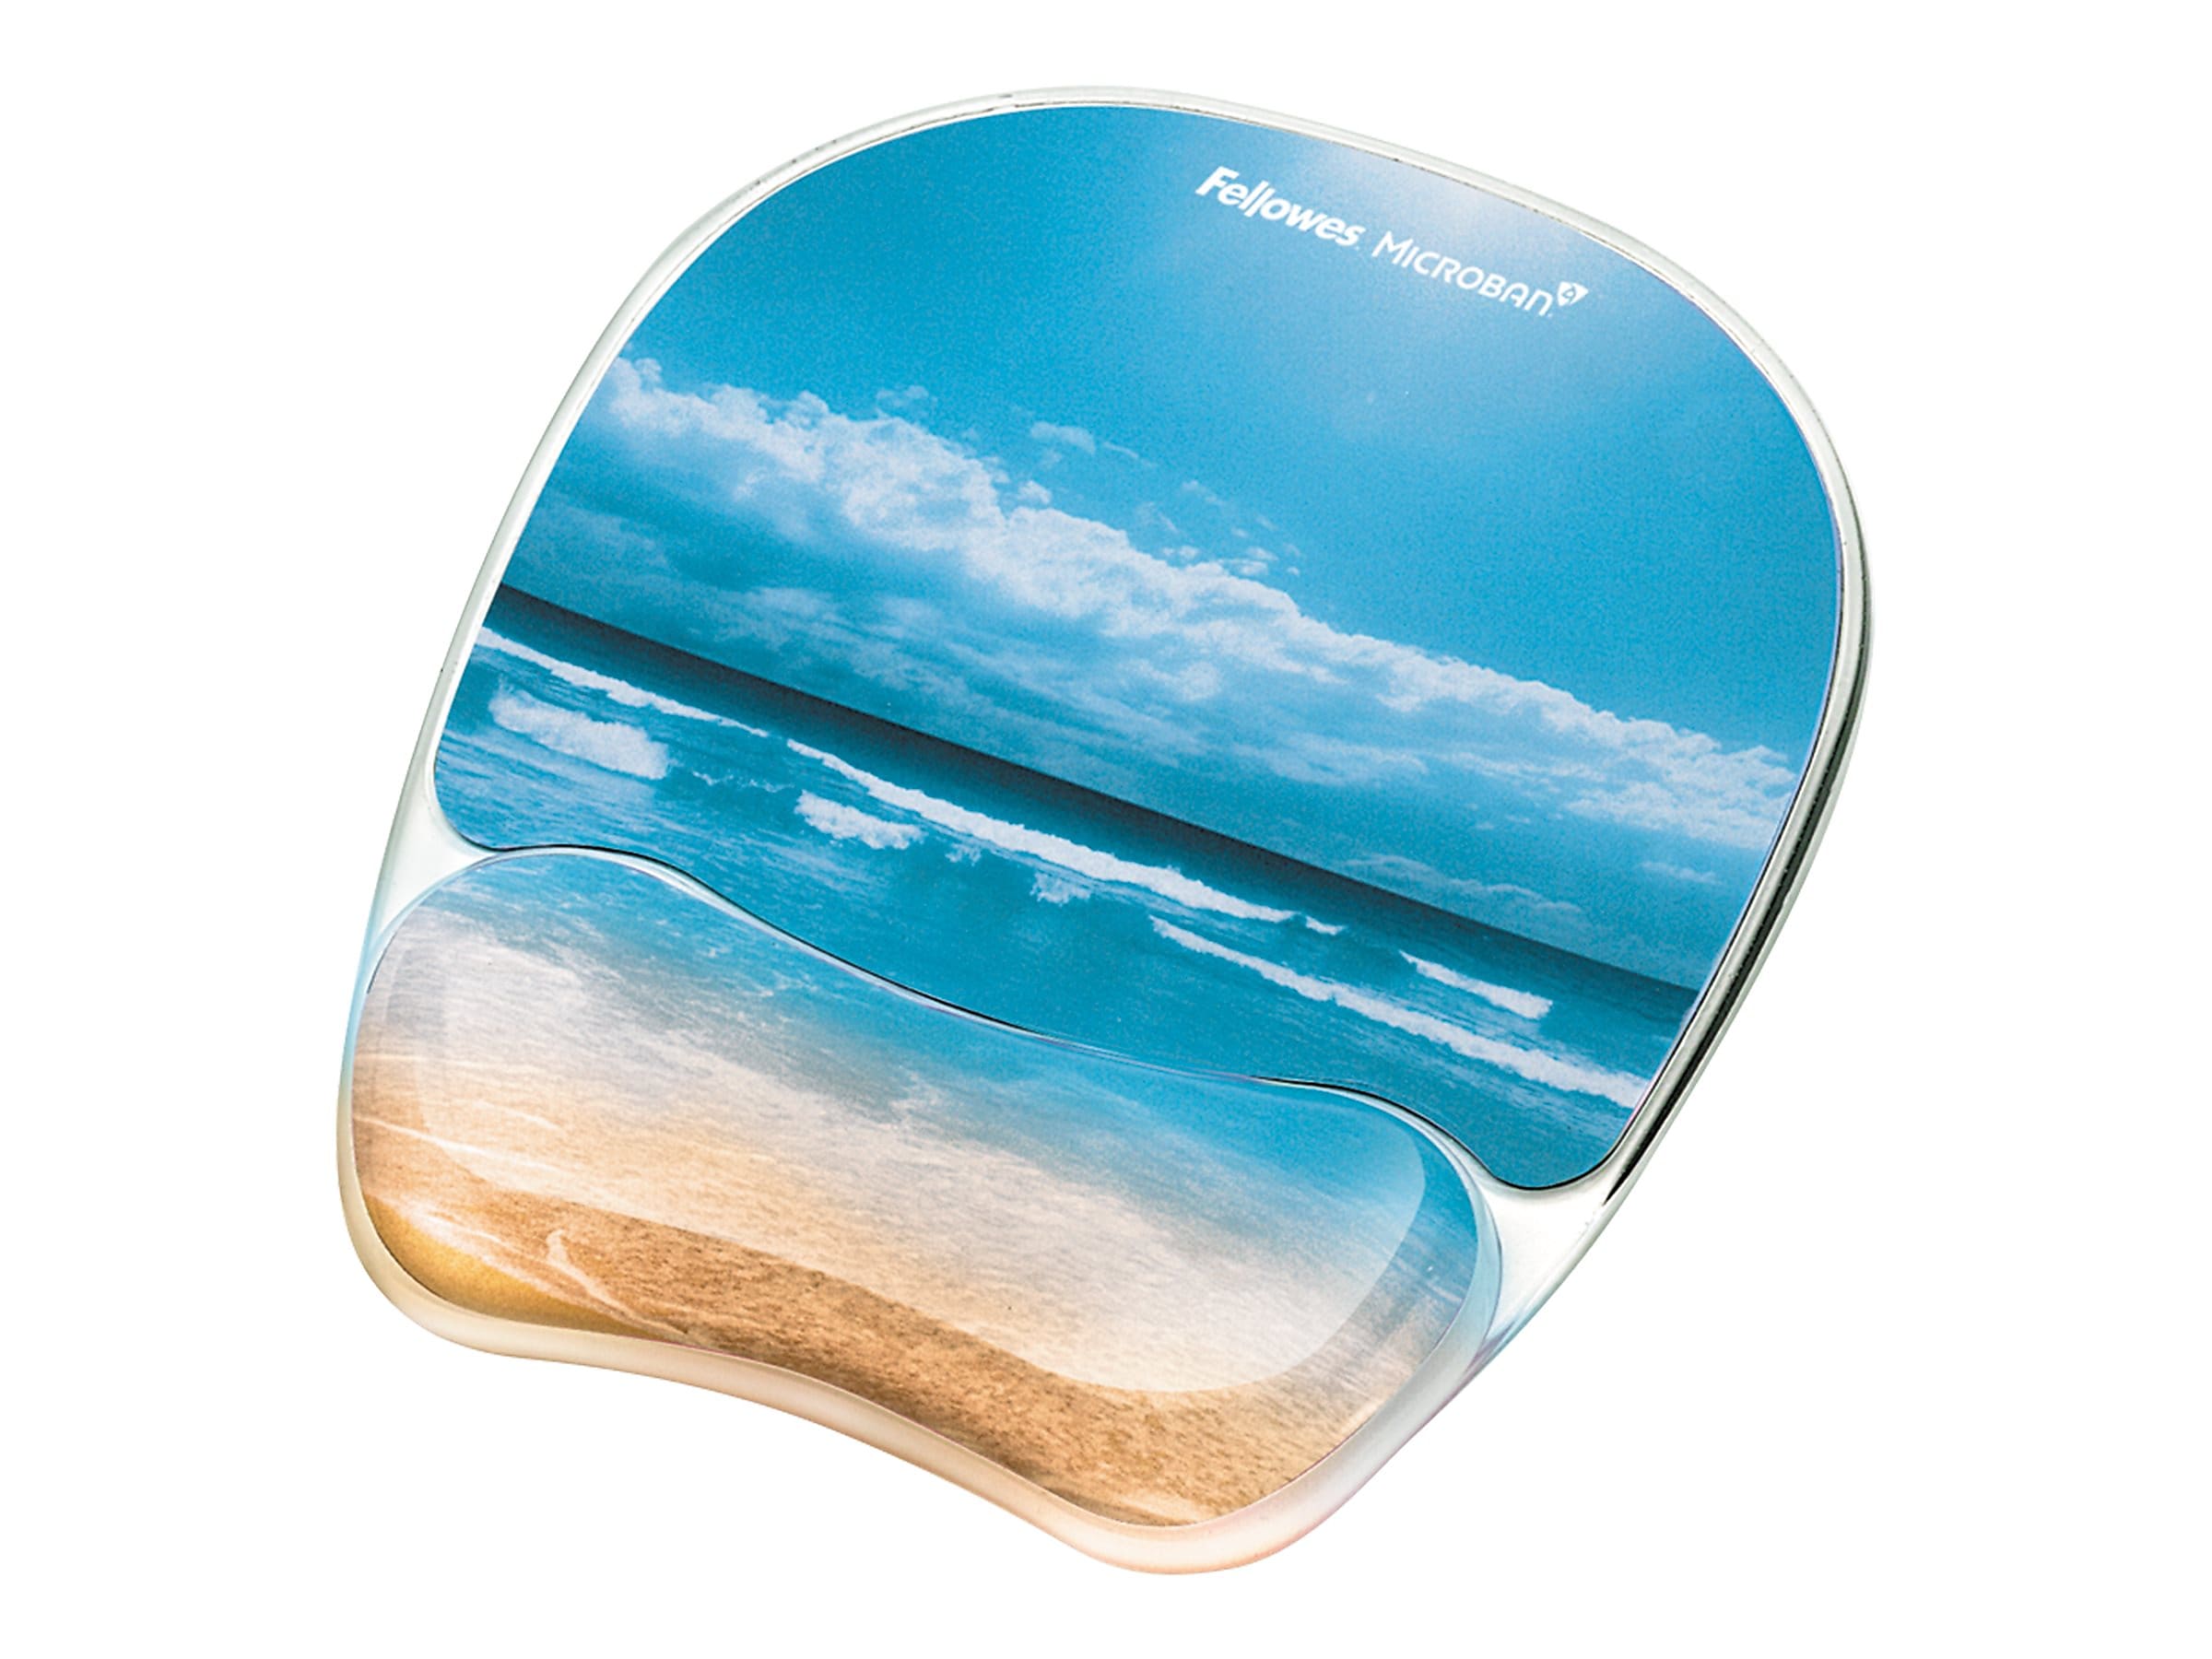 Fellowes Photo Gel Mouse Pad Wrist Rest with Microban Protection - image 3 of 3